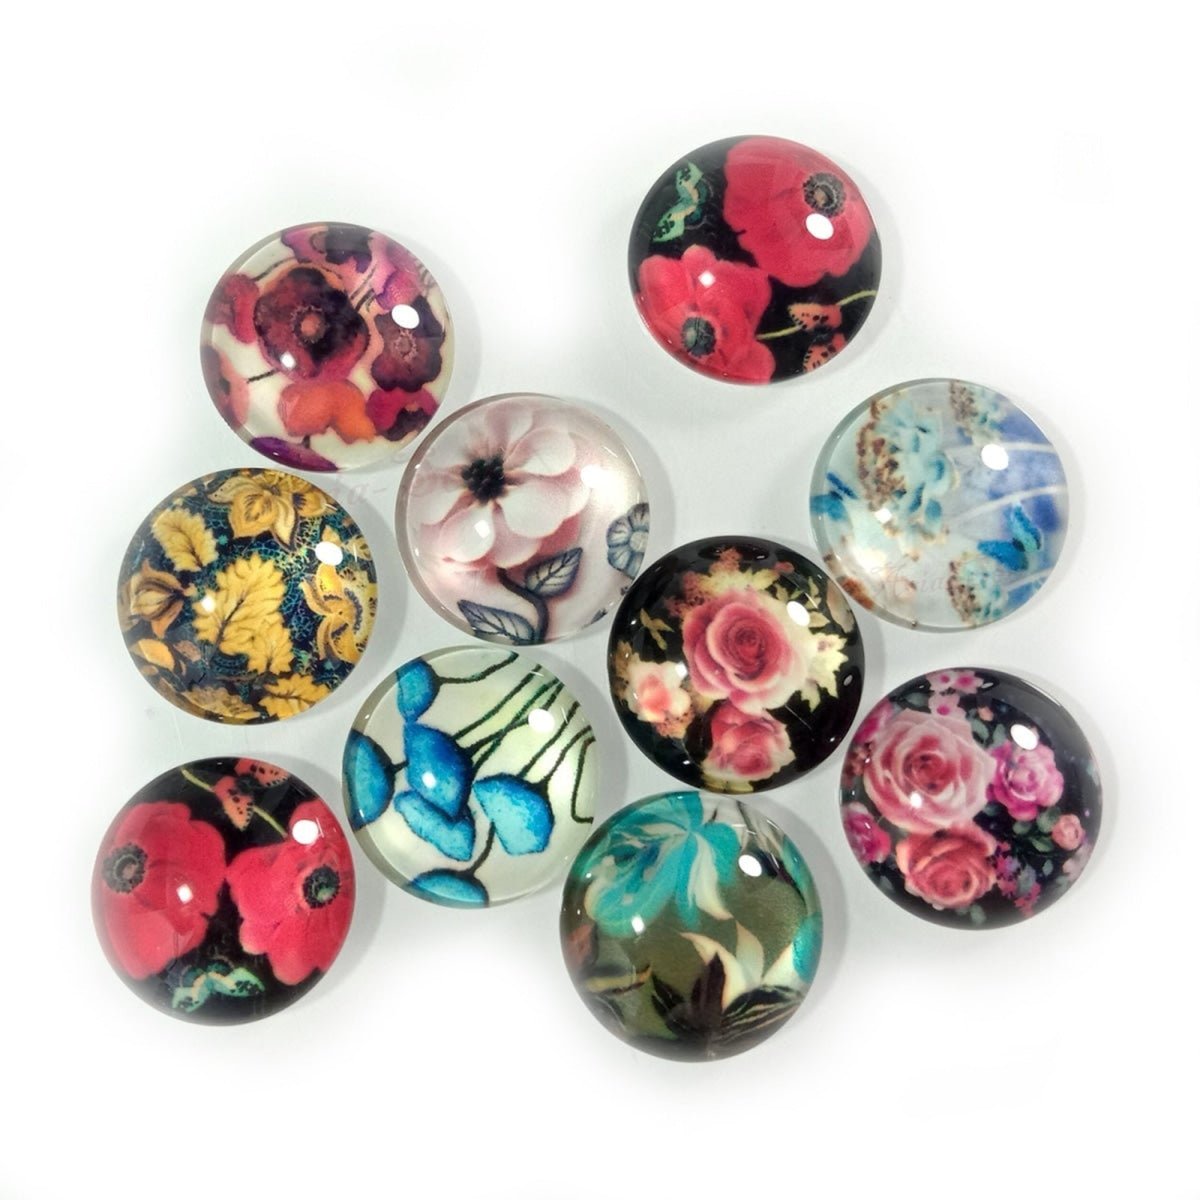 10pcs 20mm Mixed Round Flower Glass Cabochon for Bracelet Necklace Earrings Jewellery Crafts - Set 3 - - Asia Sell